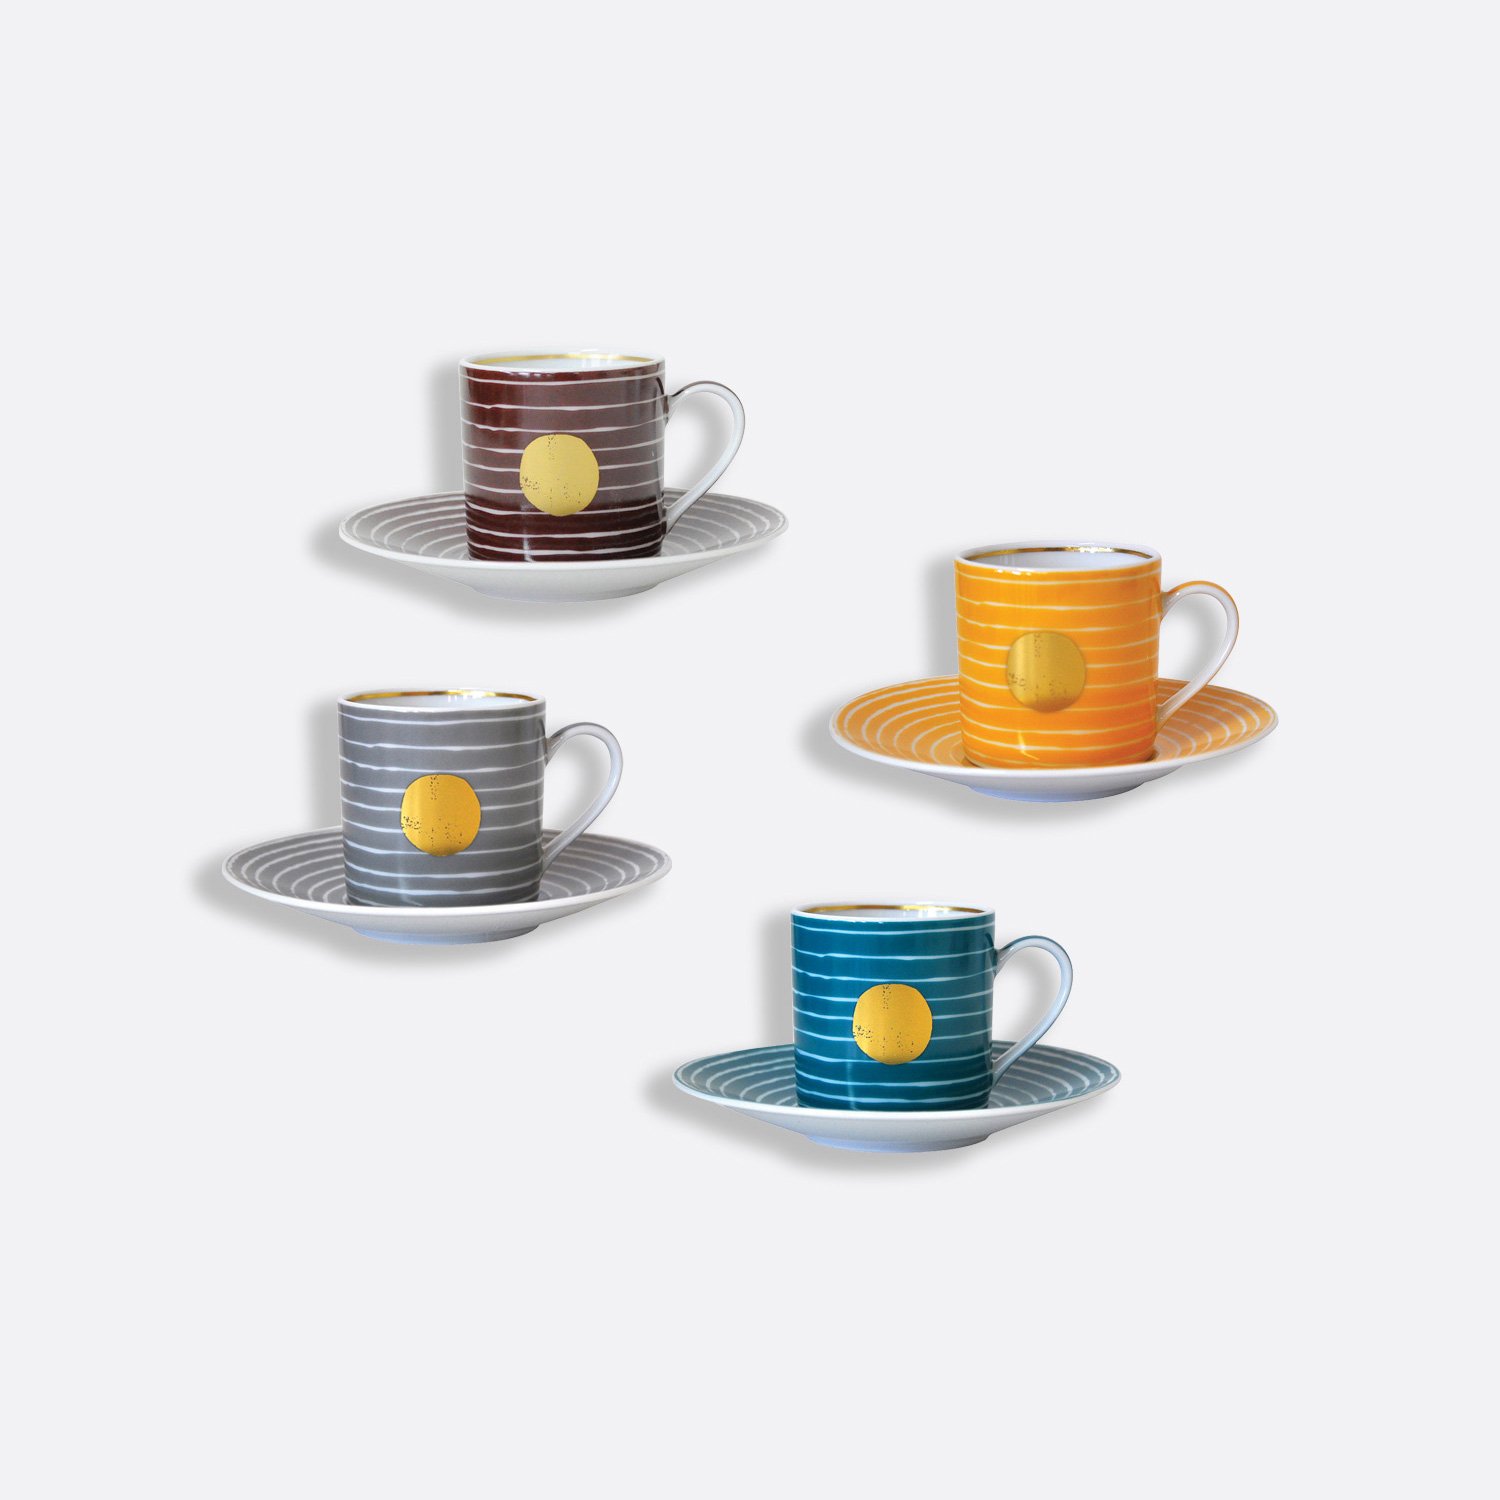 Set of 4 assorted espresso cups and saucers